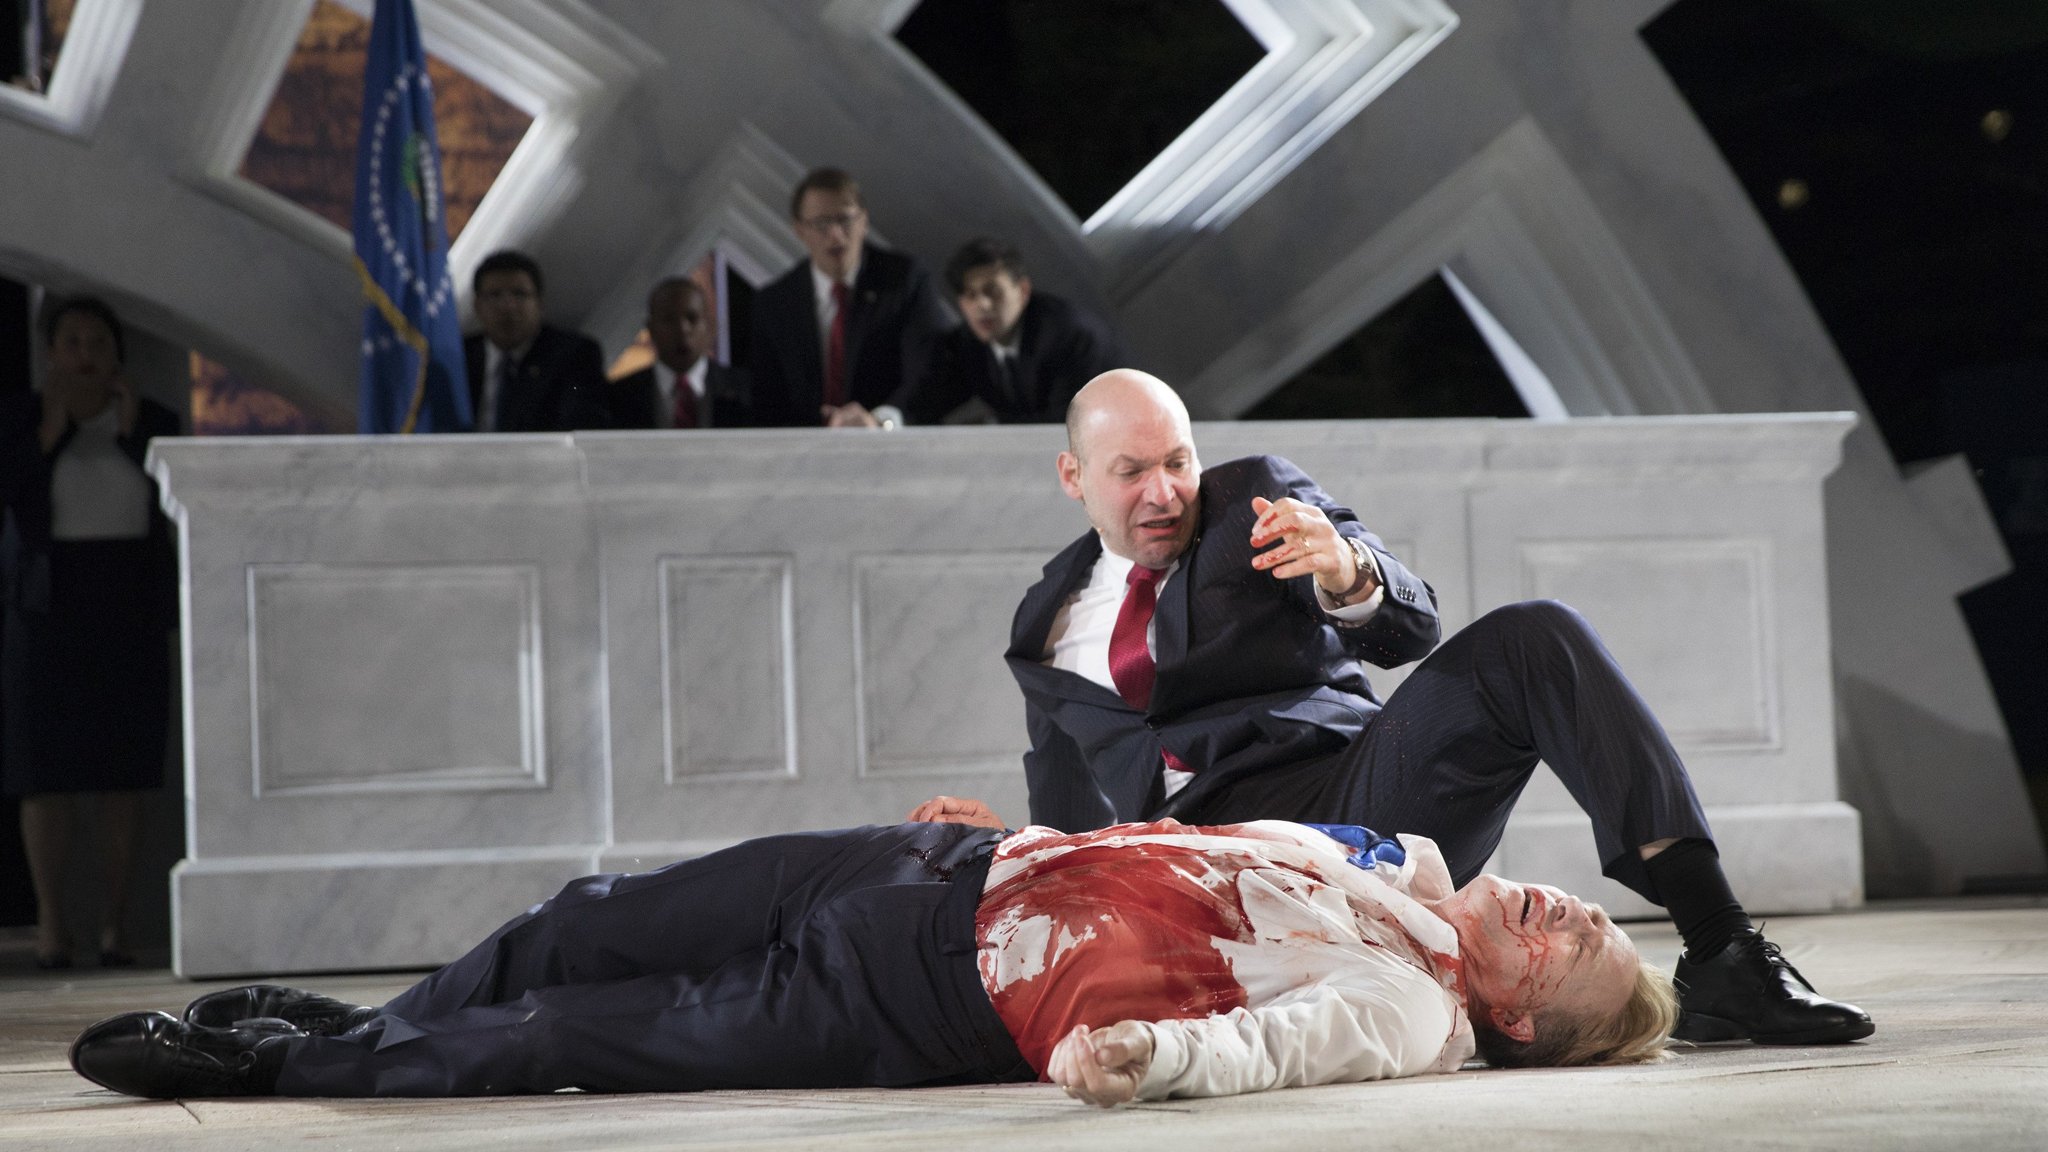 Corey Stoll, top, and Gregg Henry in "Julius Caesar," an adaptation that features an unmistakably Trumpian title character, at the Delacorte Theater in New York, May 21, 2017. In this divided post-election world, brands are weighing in on theater and news interviews, as they grapple with the fast-spinning wheels of social media and increasingly polarized consumer groups. (Sara Krulwich/The New York Times) Credit: New York Times / Redux / eyevine For further information please contact eyevine tel: +44 (0) 20 8709 8709 e-mail: info@eyevine.com www.eyevine.com *** Local Caption *** 14973915